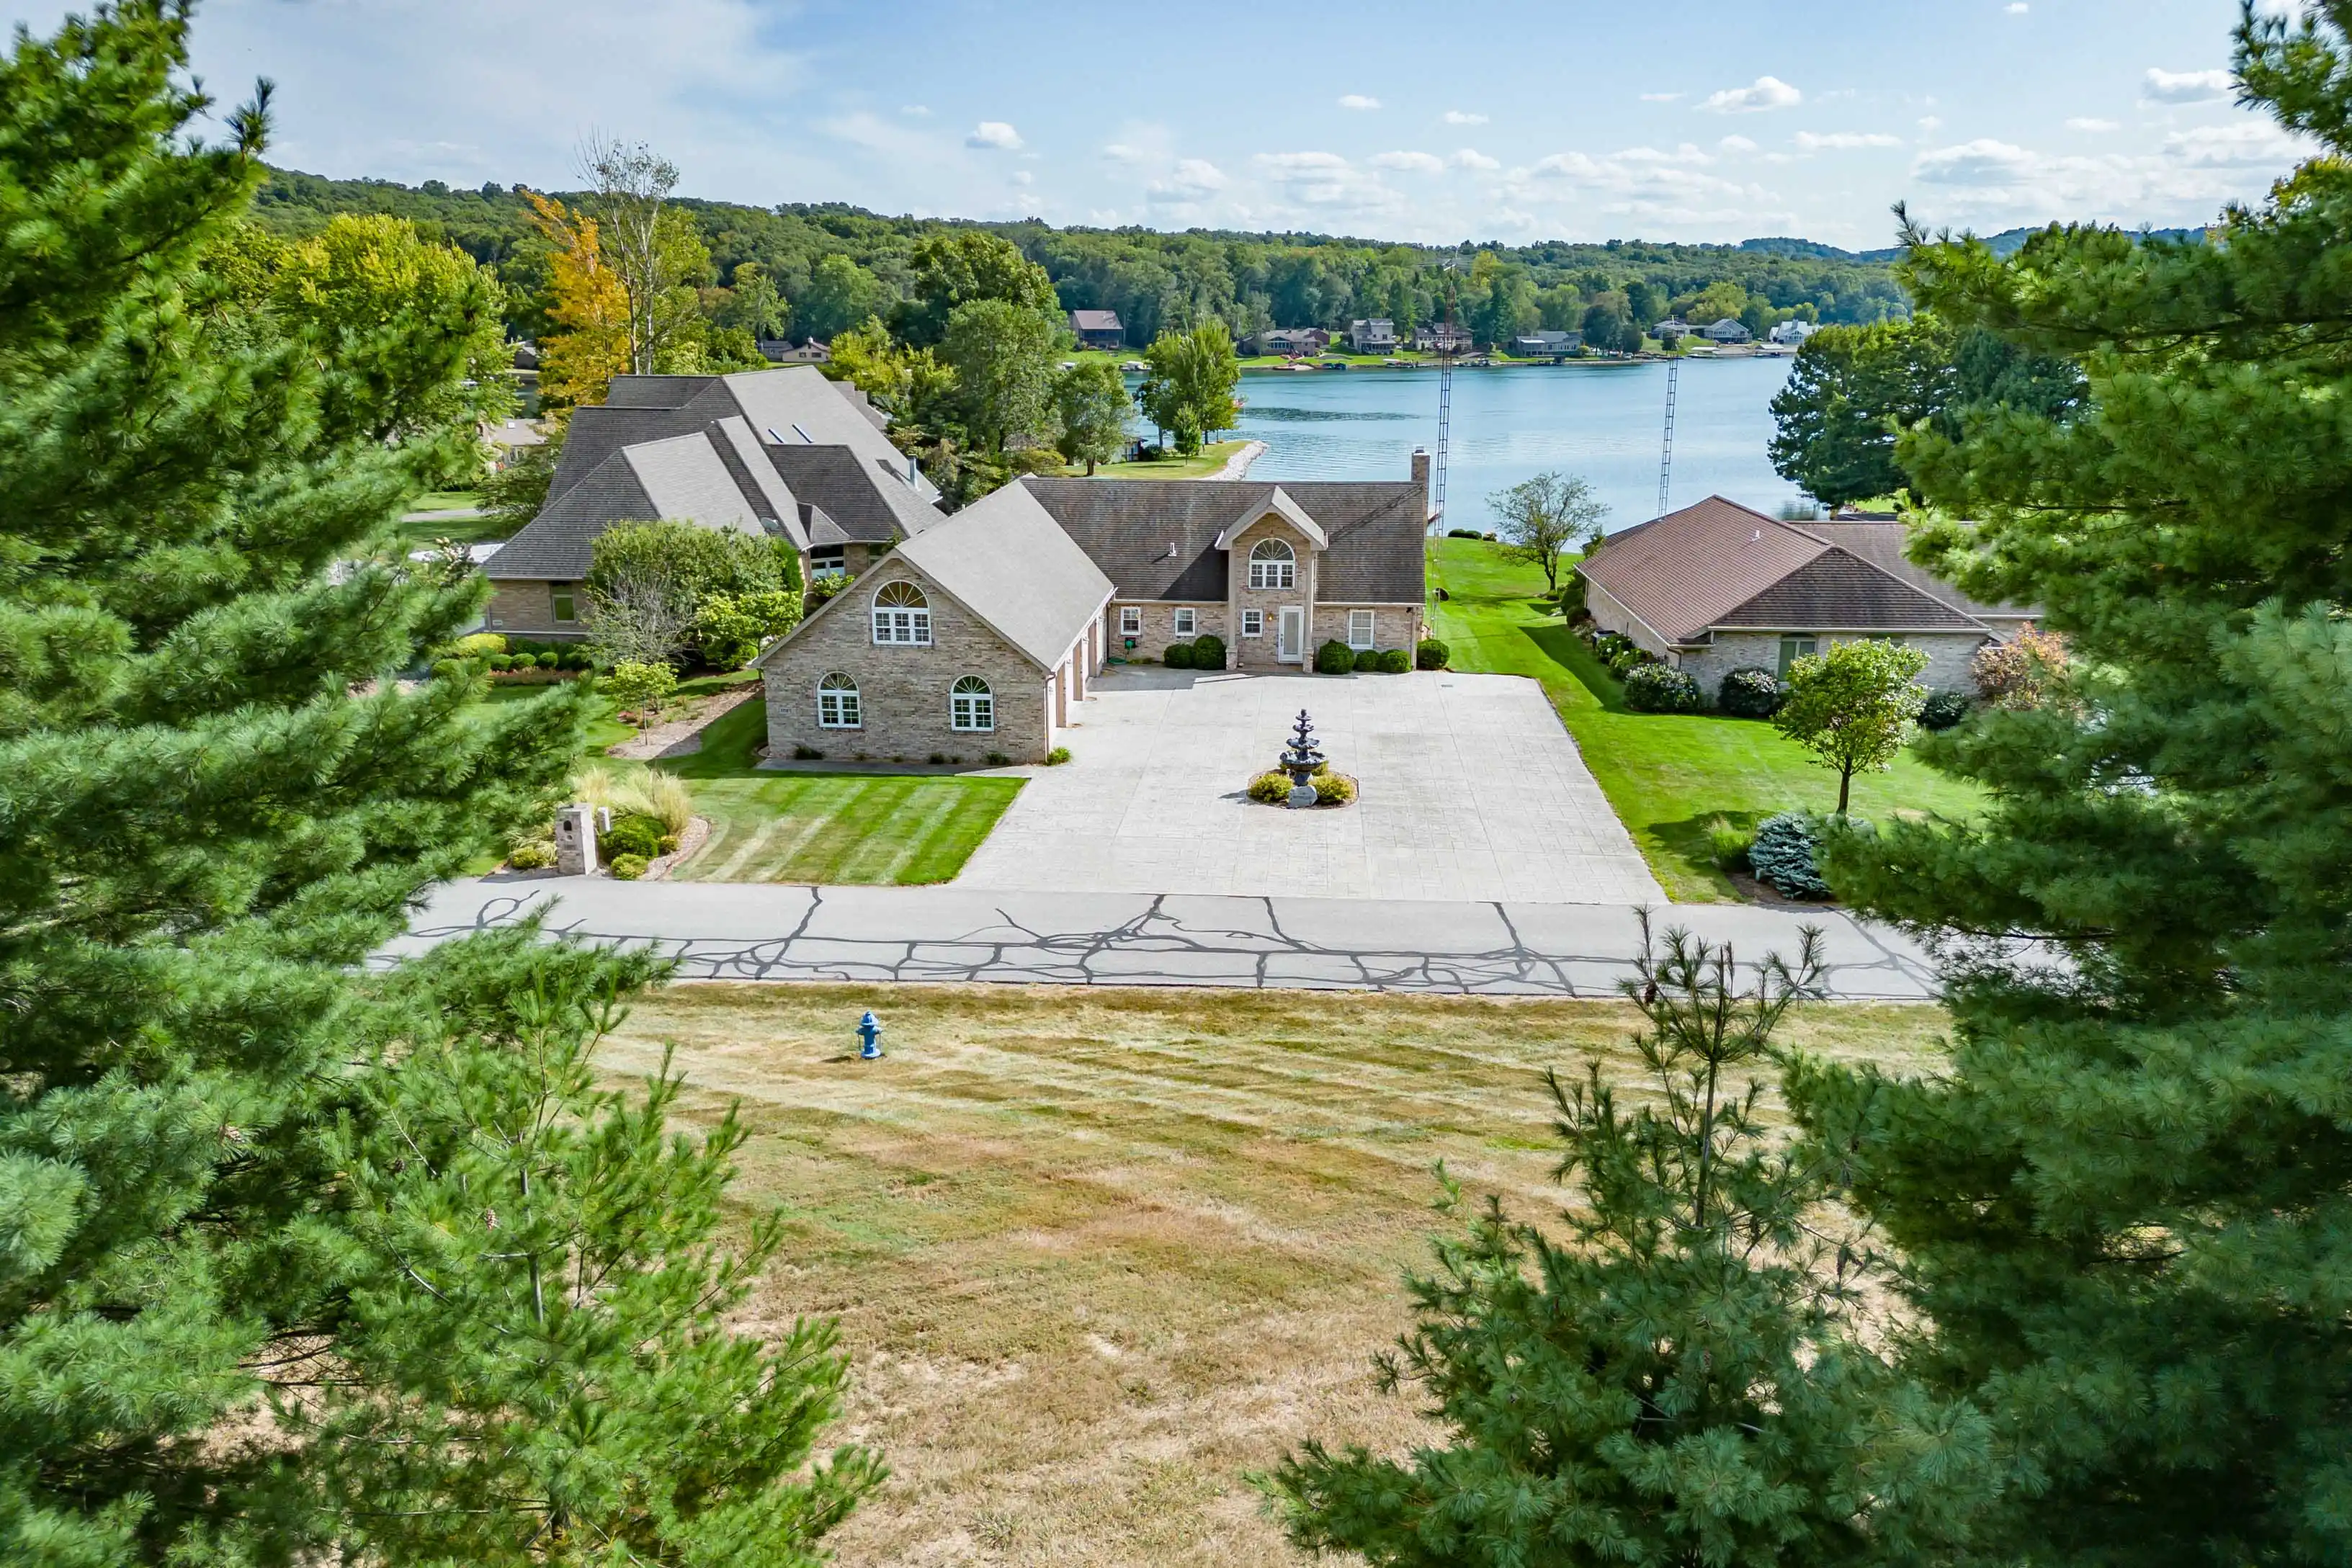 Aerial view of a spacious residential property with a large driveway, surrounded by trees, overlooking a lake with other houses in the distance.